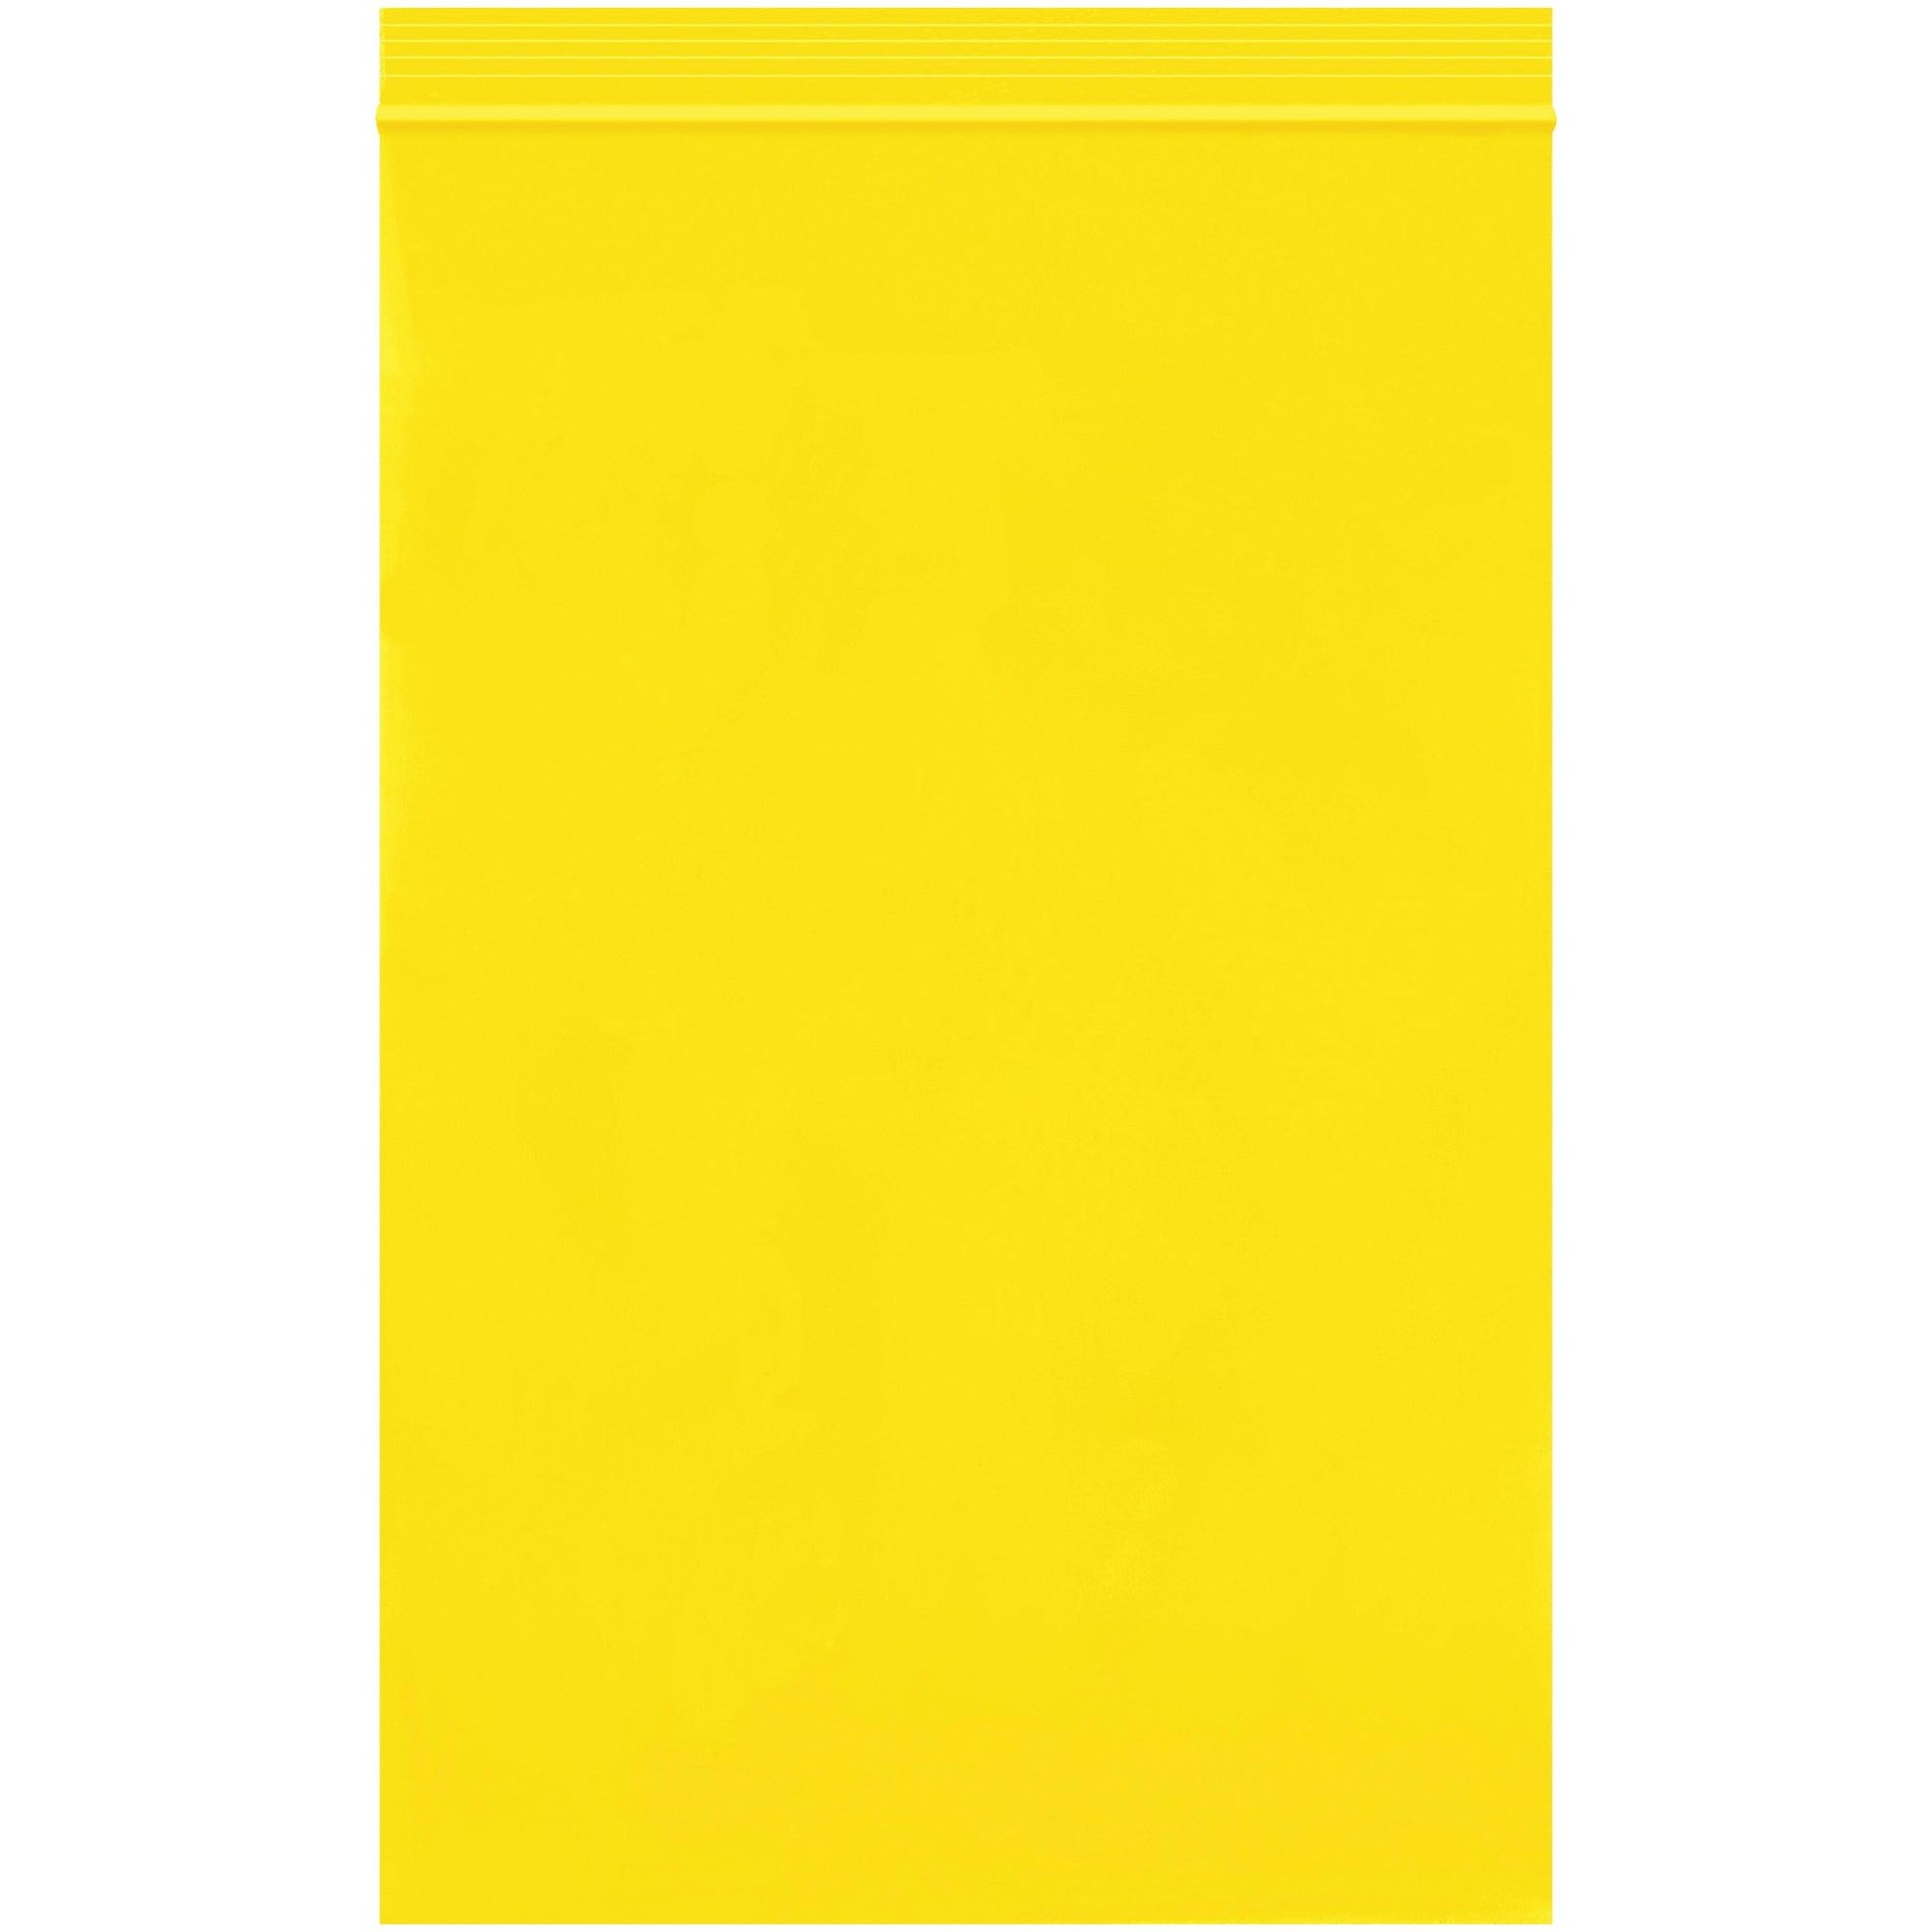 6 x 9" - 2 Mil Yellow Reclosable Poly Bags - PB3615Y